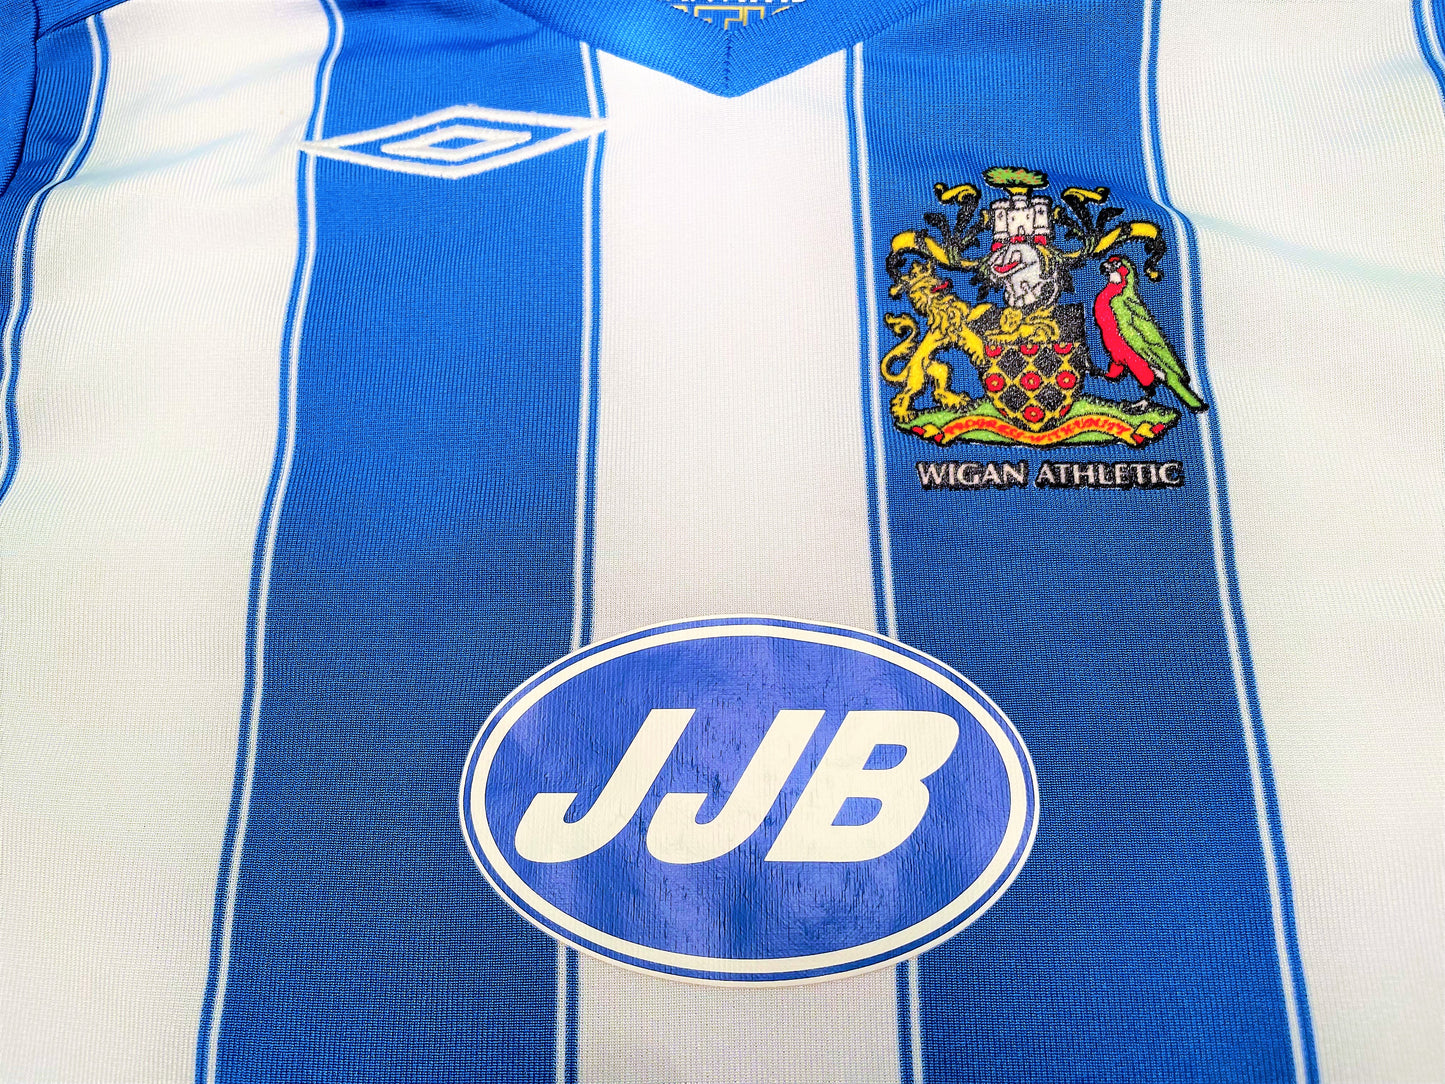 Wigan Home Shirt 2007 (excellent) 6 to 7 years. Height 17 inches